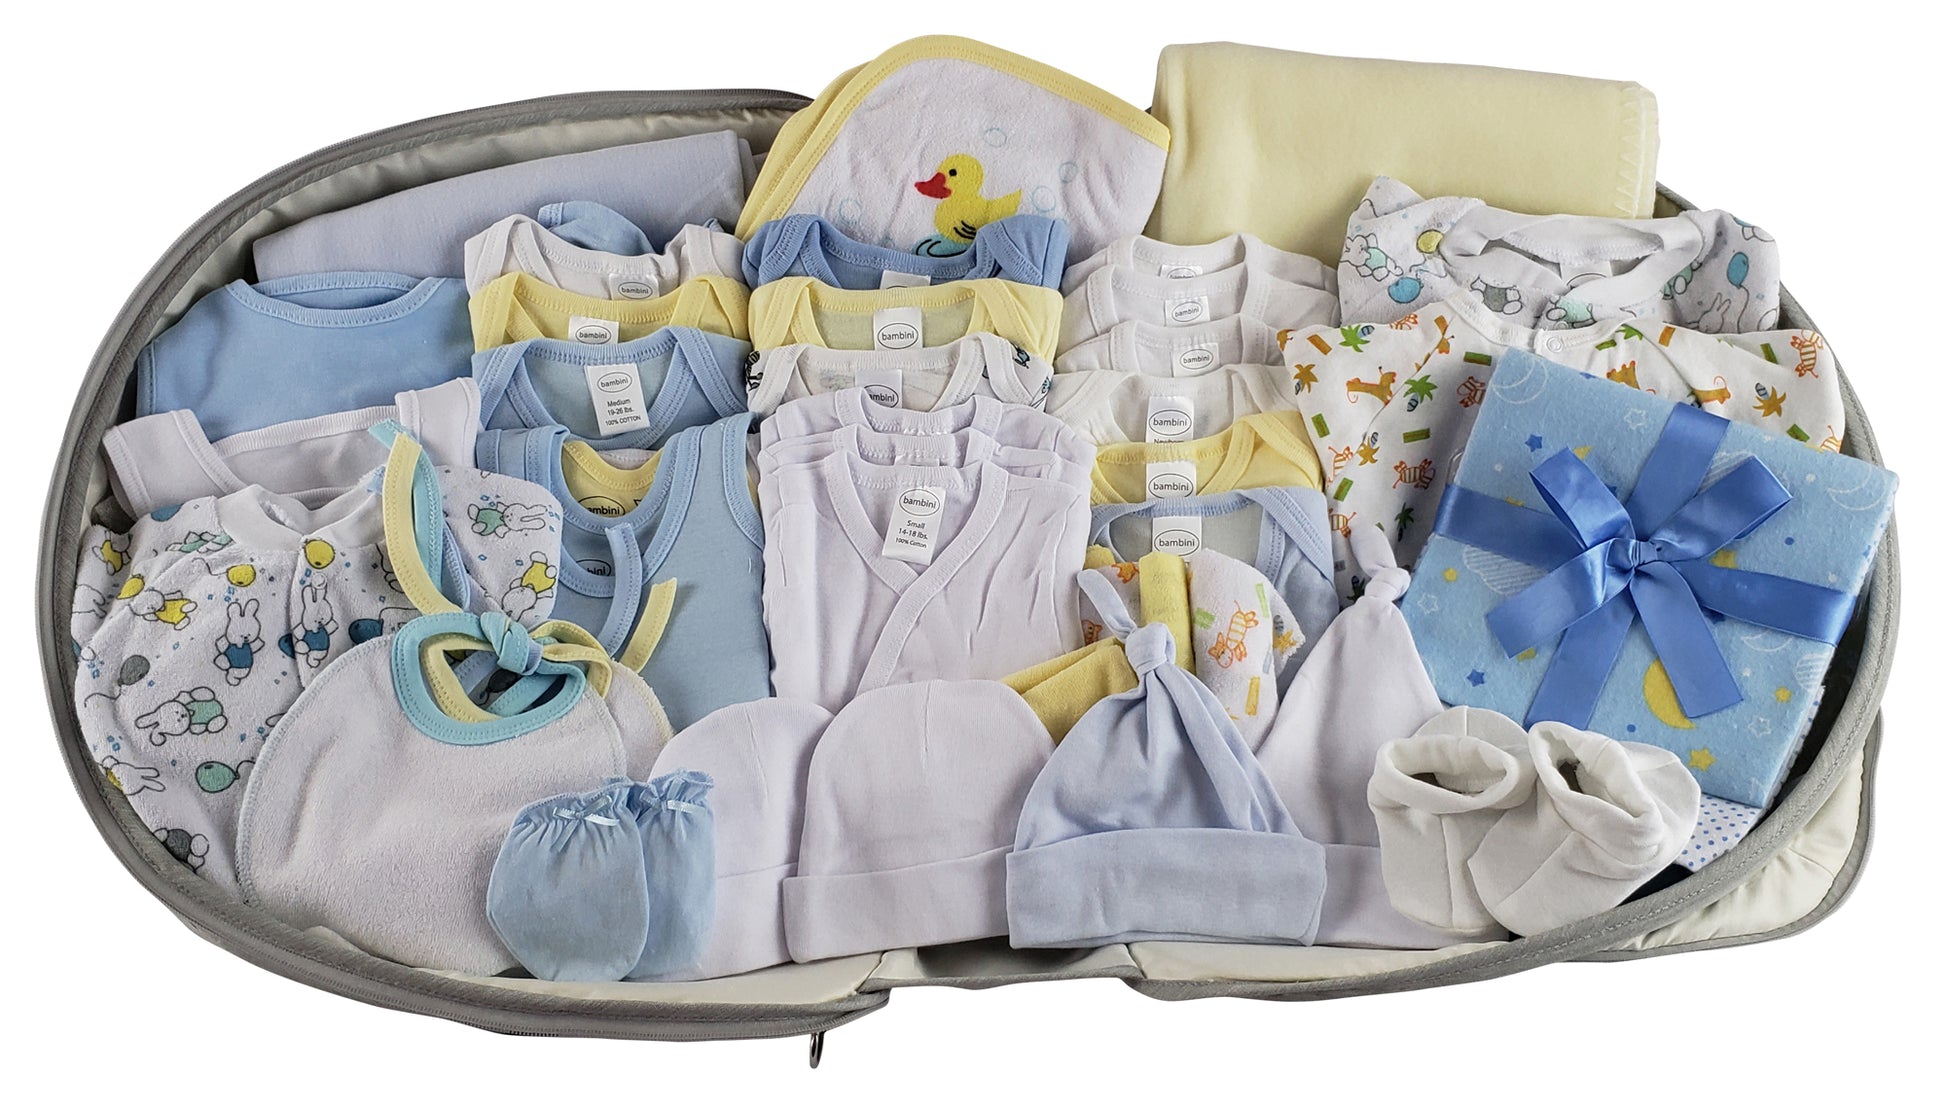 Boys 44 pc Baby Clothing Starter Set with Diaper Bag 808-44-Set